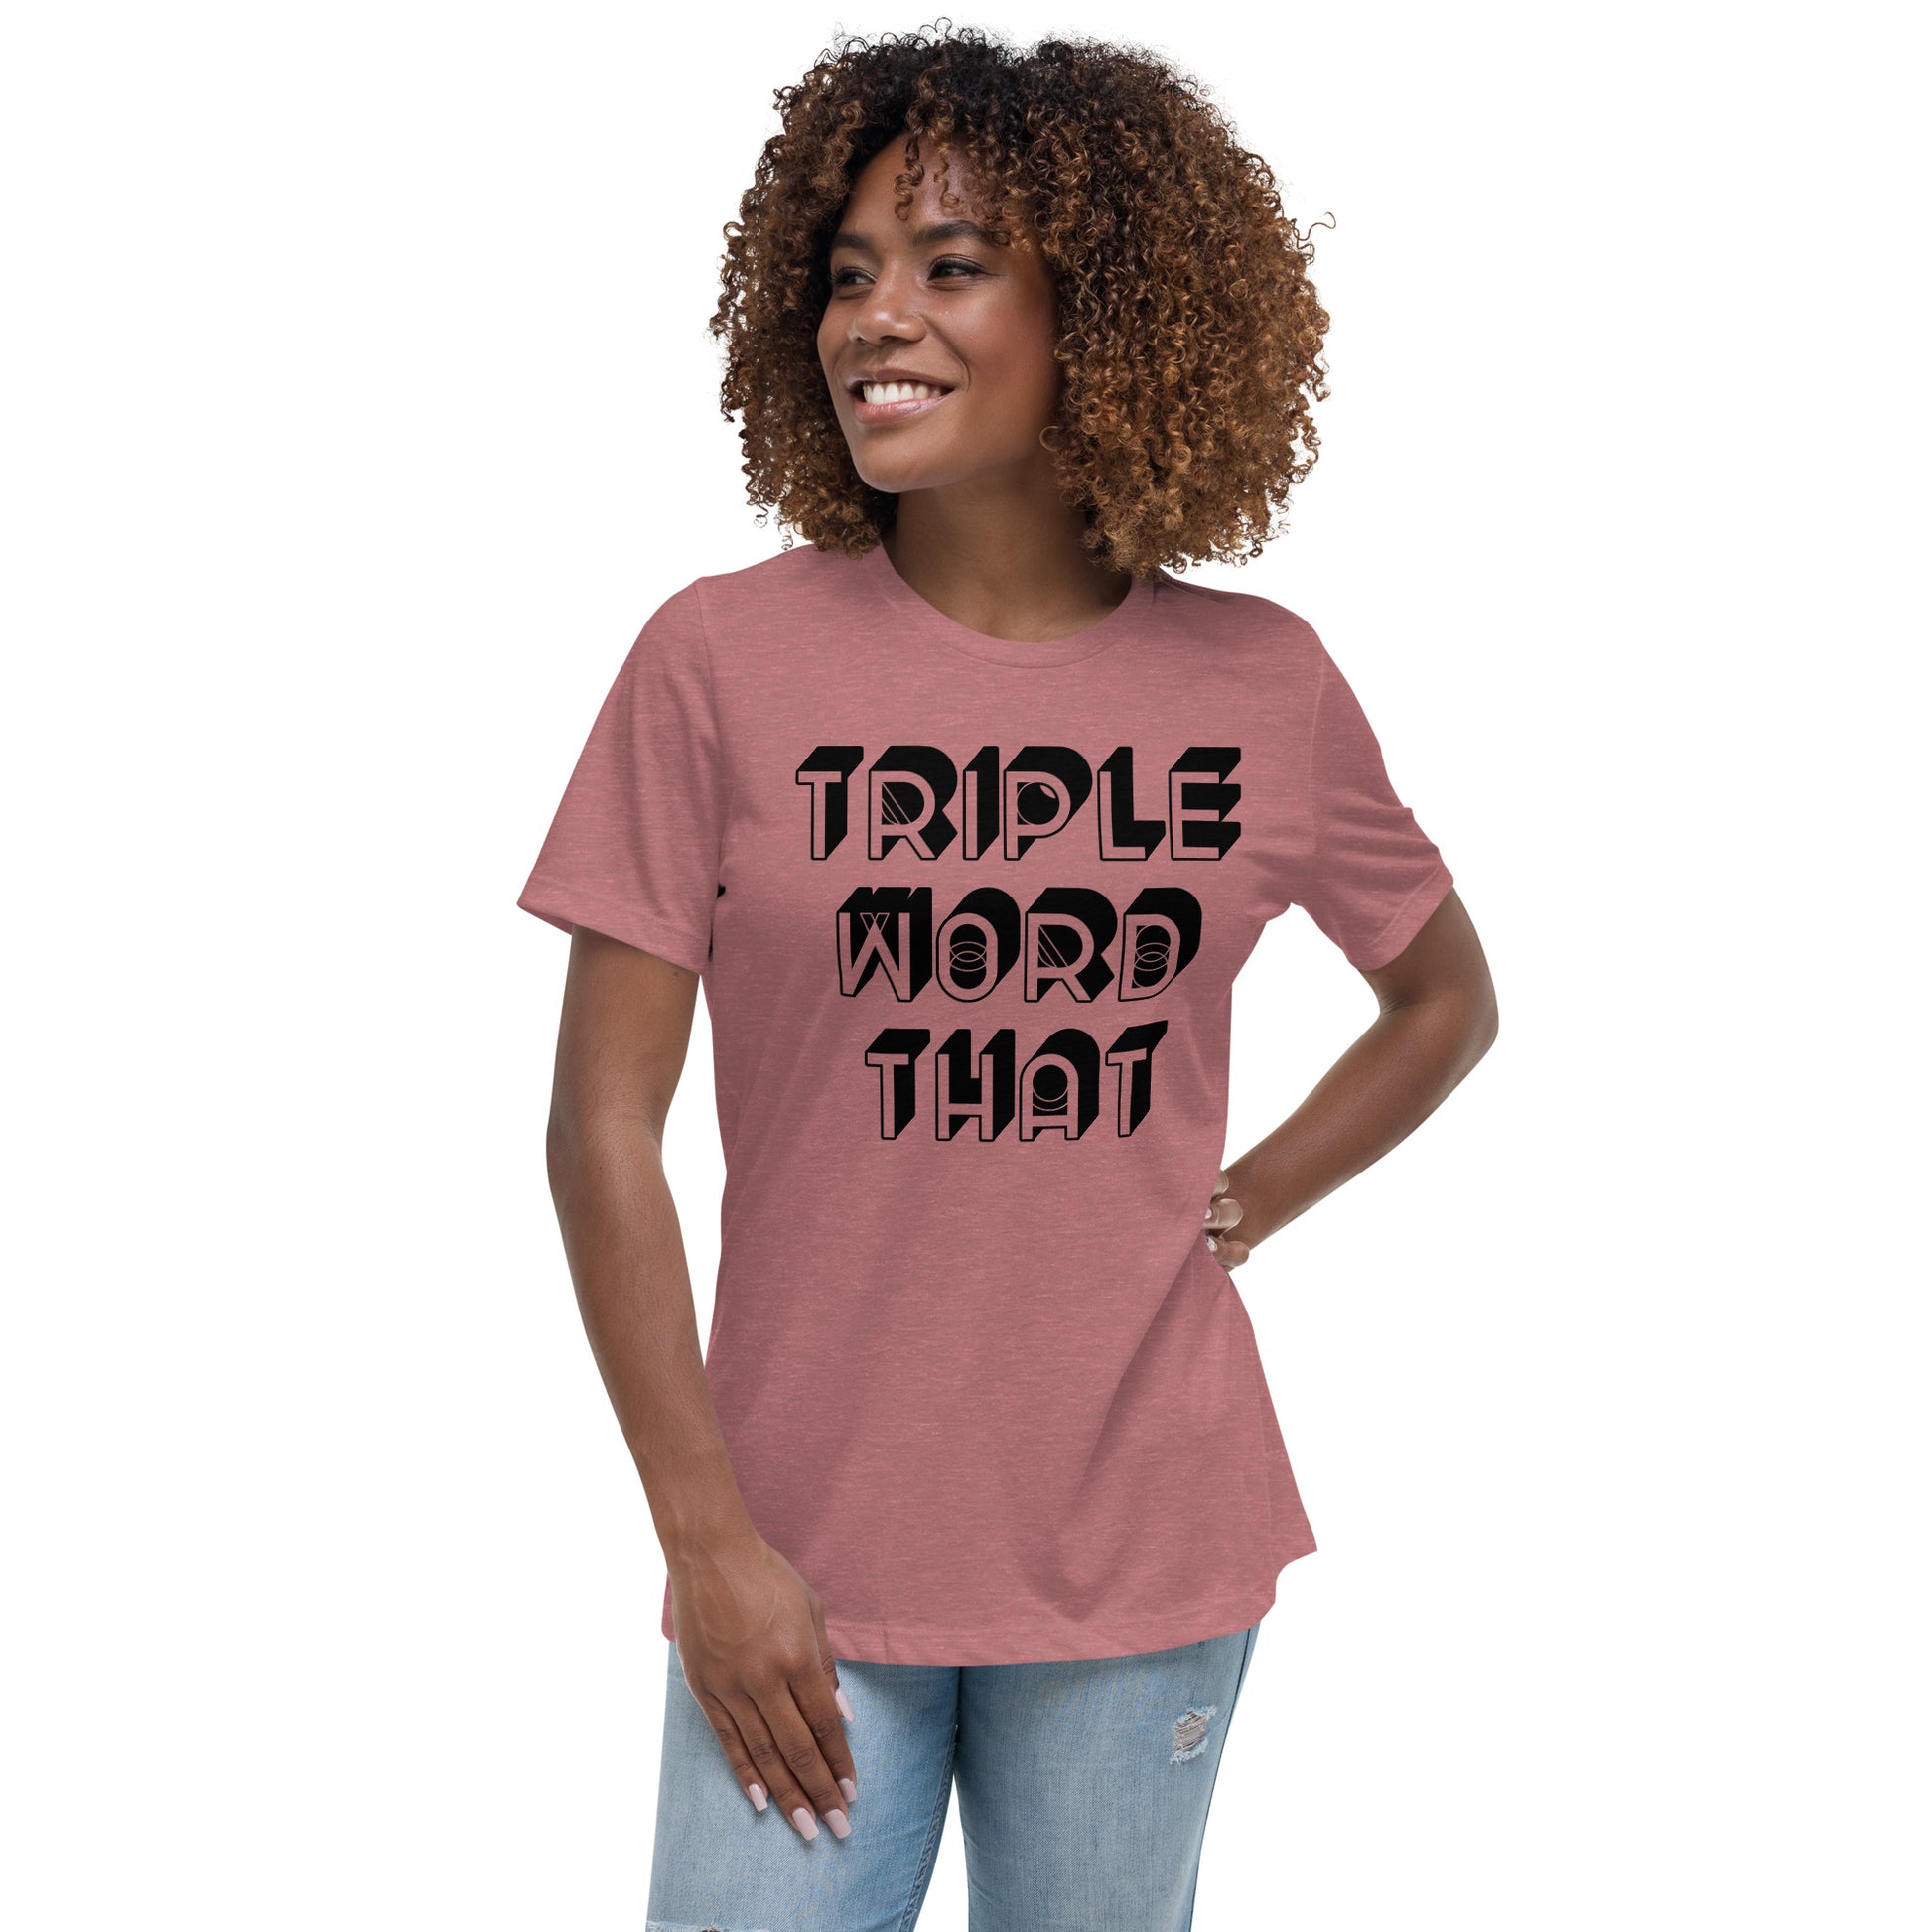 Triple Word That Women's Relaxed T-Shirt